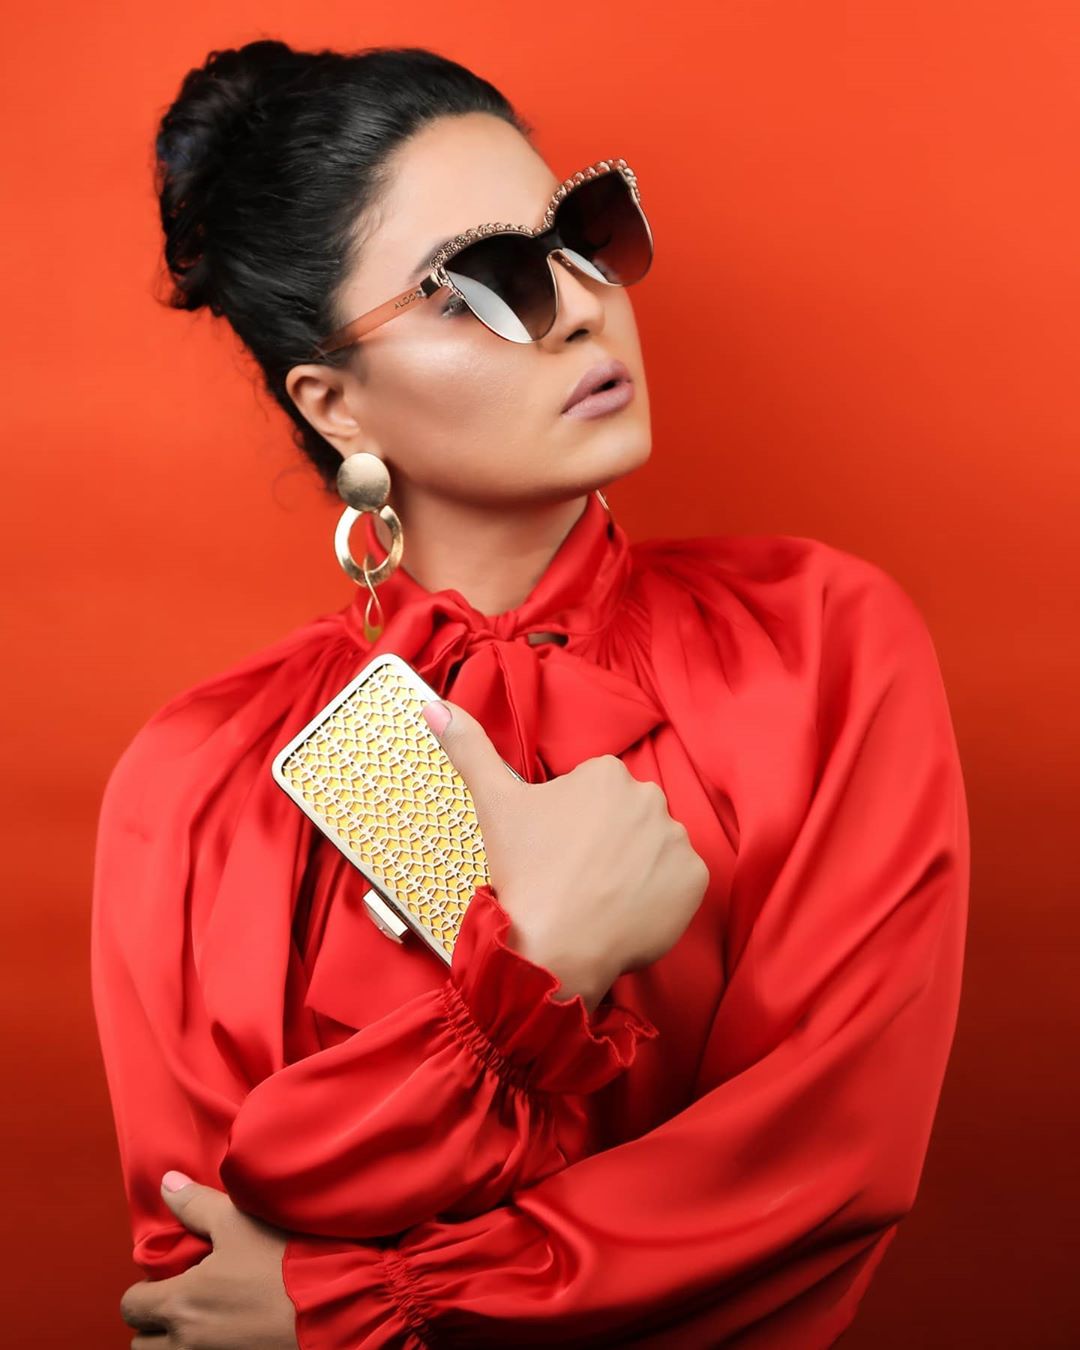 Actress Veena Malik Latest Beautiful Pictures from her Instagram